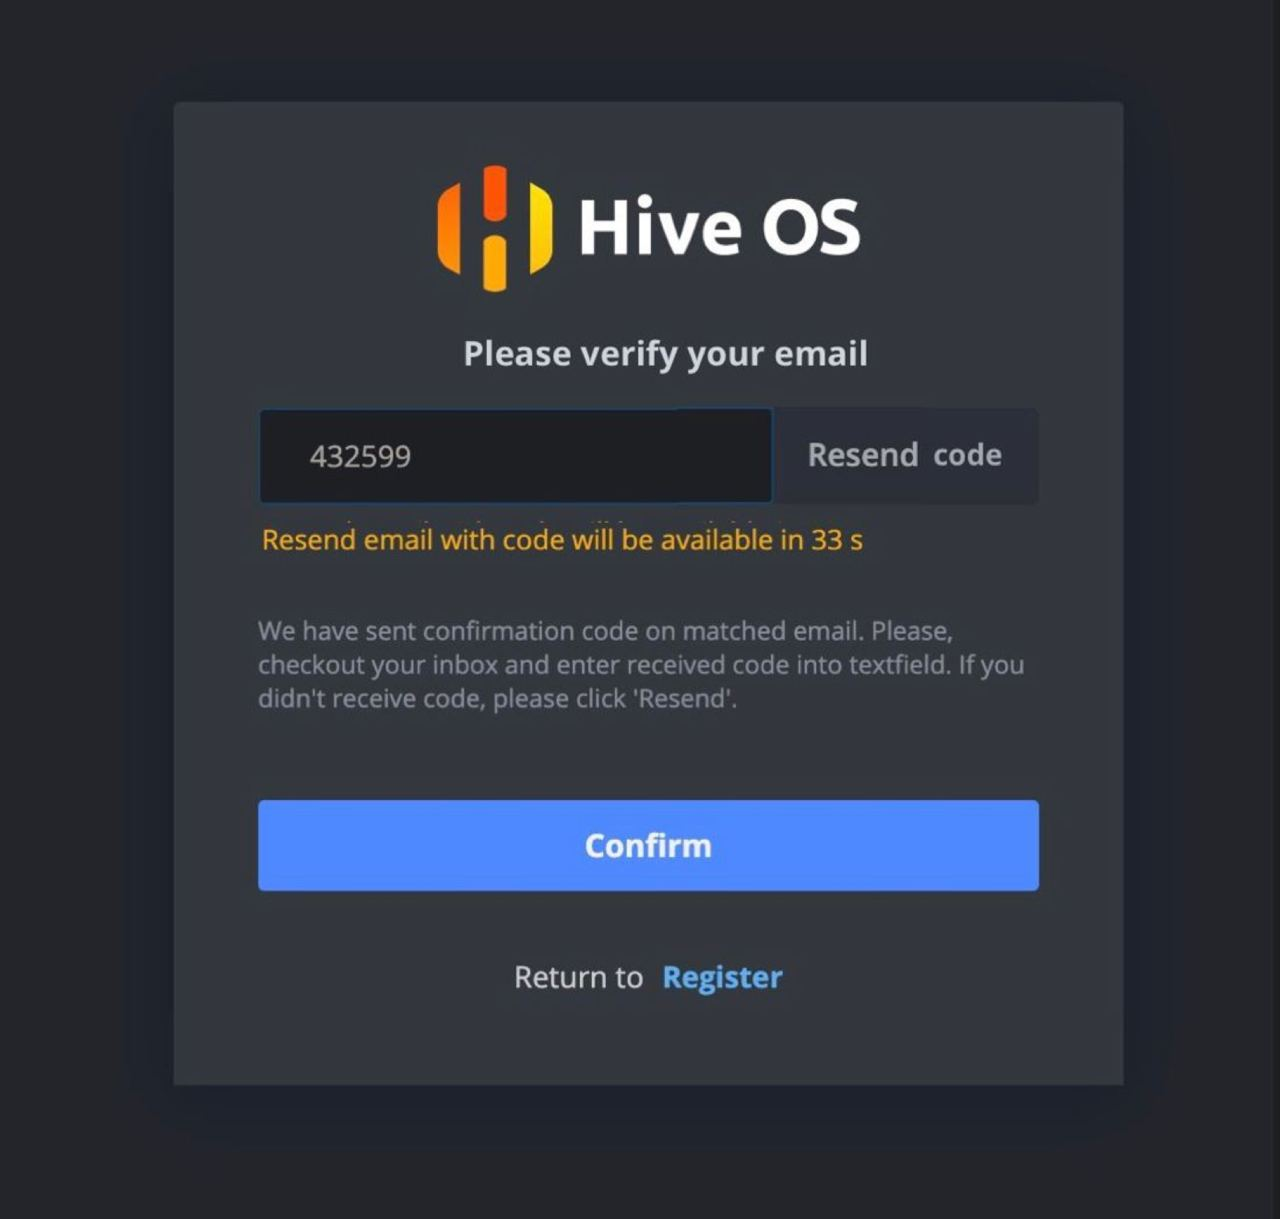 securityrulesofhiveos